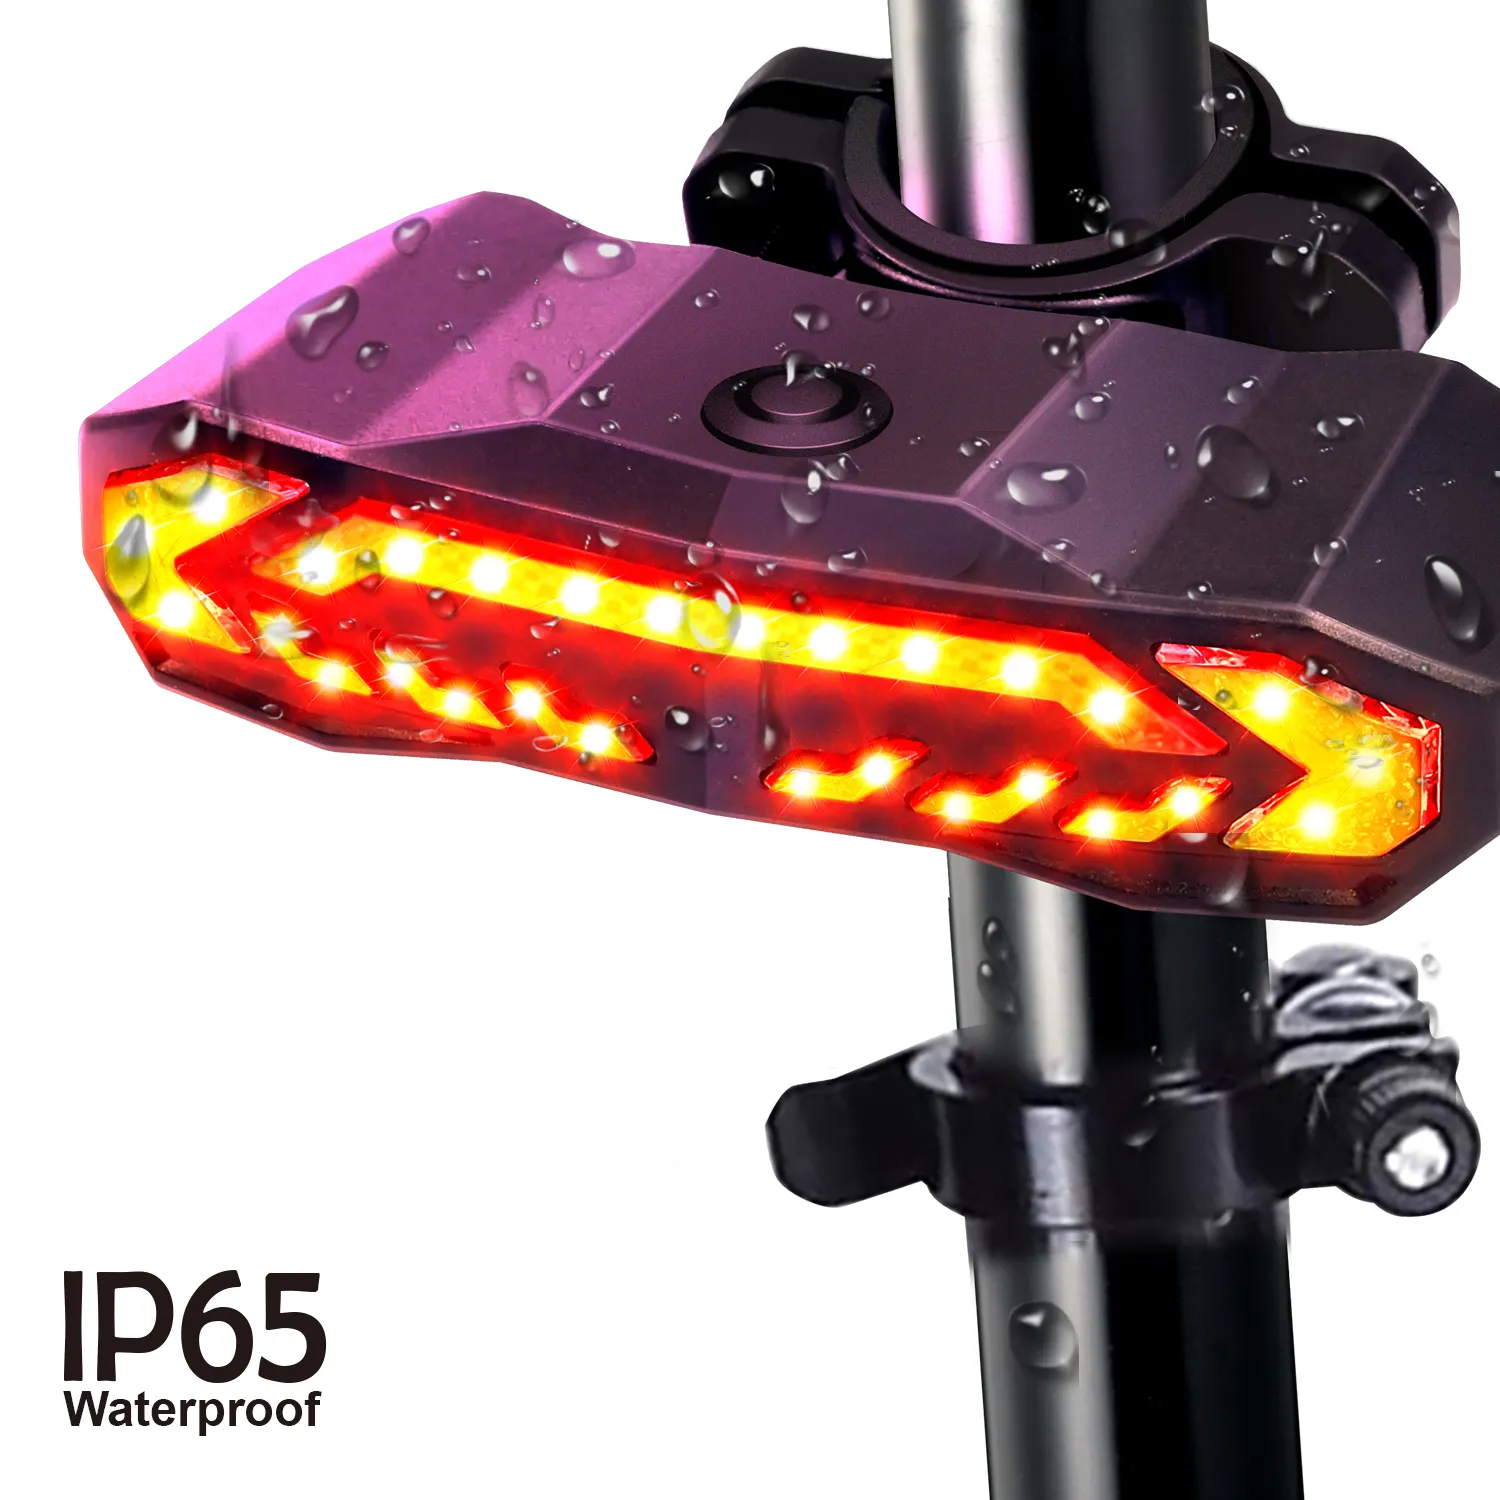 Waterproof USB Rechargeable IP65 Bike Rear Light Bicycle Alarm Anti-Theft Rear Led Light Bright Bicycle Tail Light